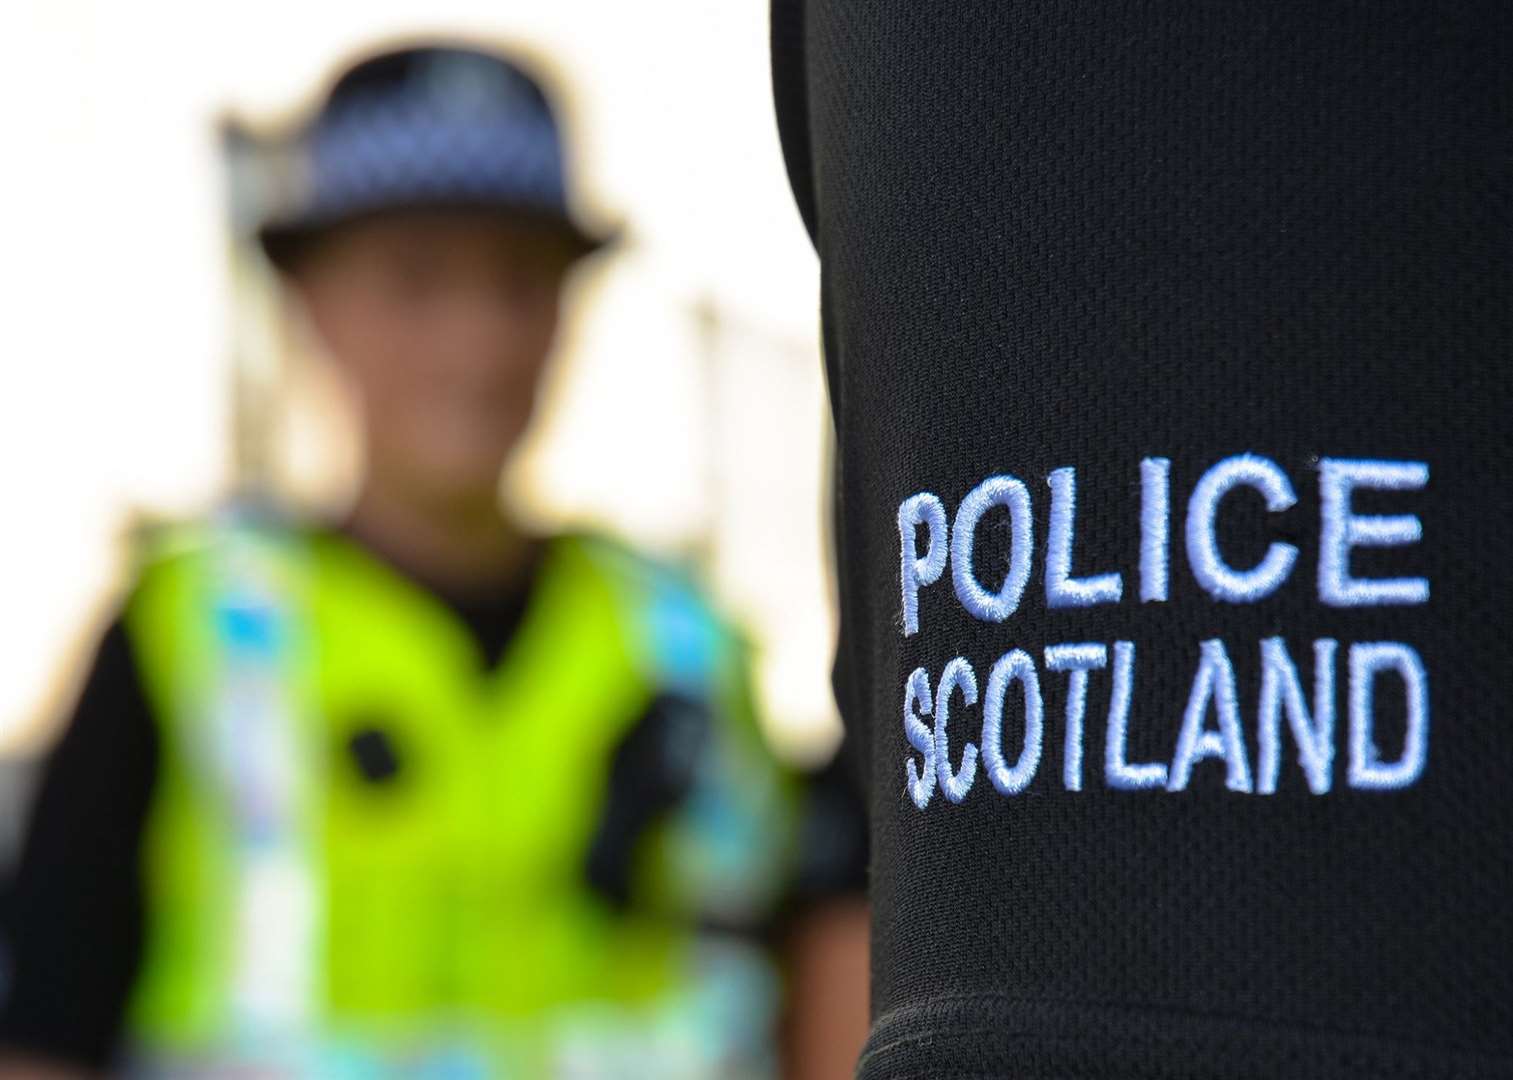 Police Scotland is appealing for witnesses to a speeding incident on the A9 at Tore on Friday.